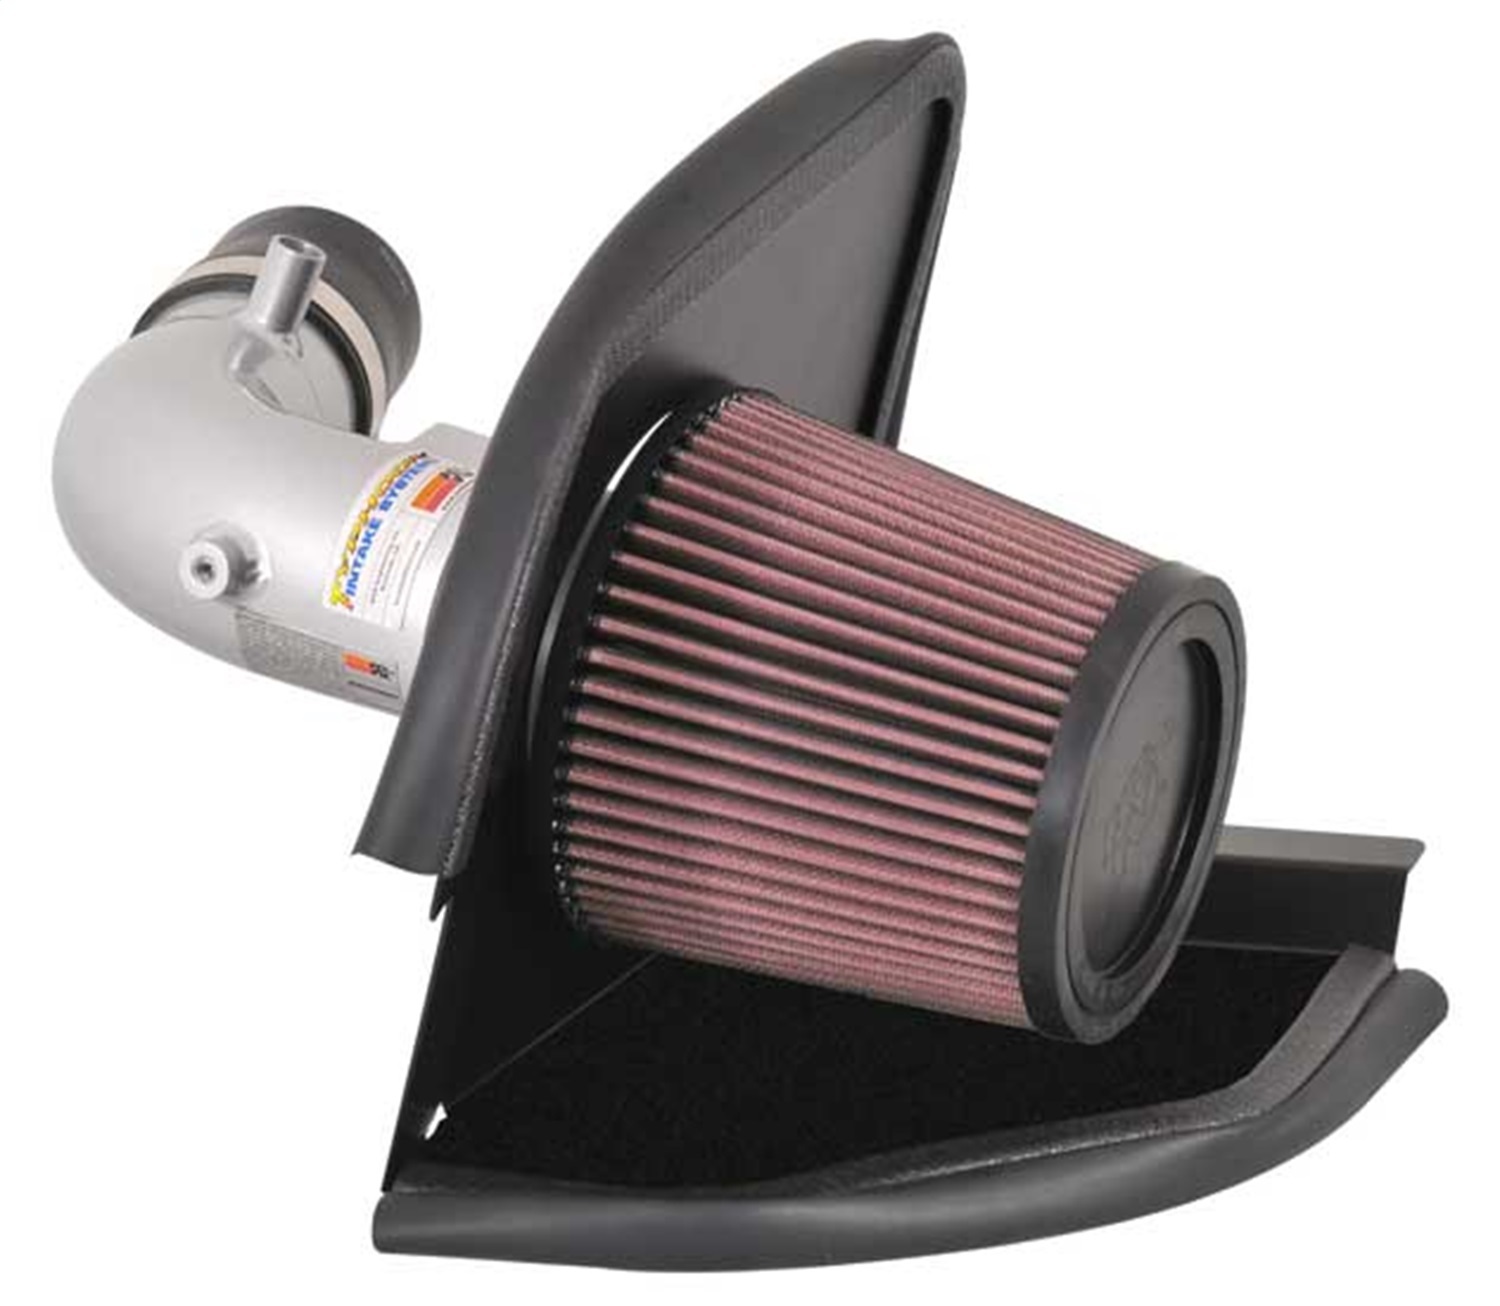 K&N Filters K&N Filters 69-6011TS Typhoon; Cold Air Intake Filter Assembly Fits 07-09 3